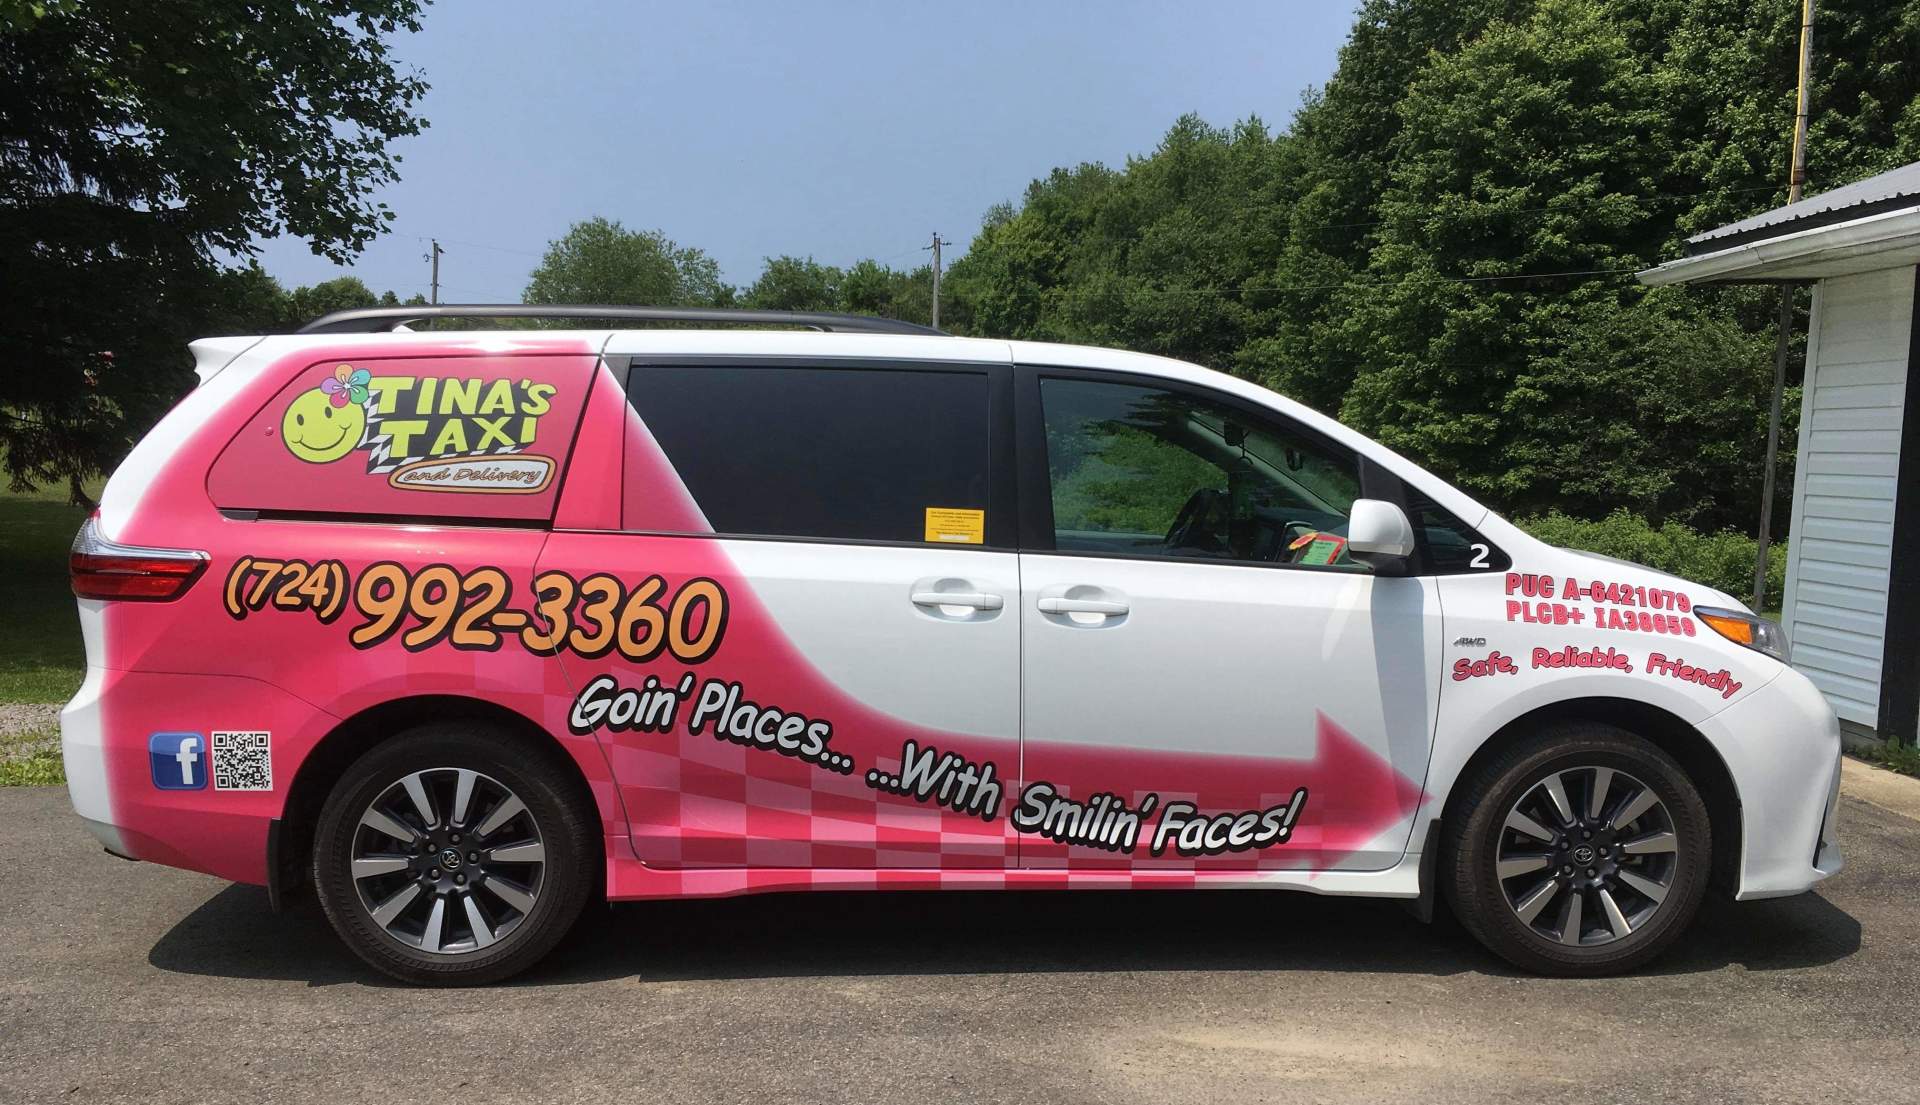 Tina's Taxi & Delivery Photo Gallery